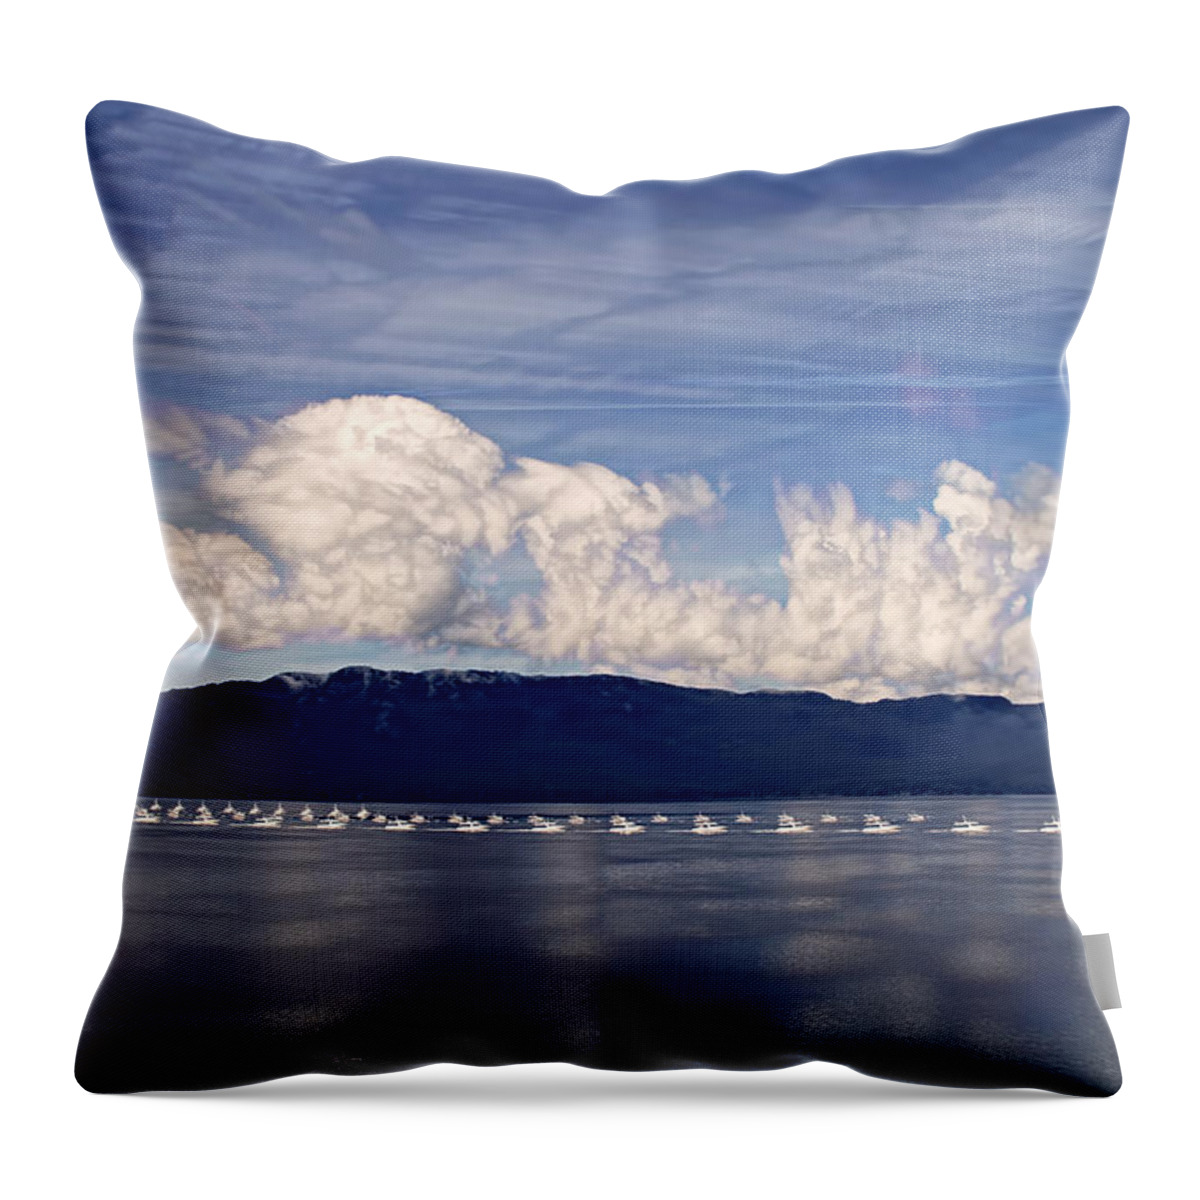 Clouds Throw Pillow featuring the photograph Time Travel by Peggy Collins